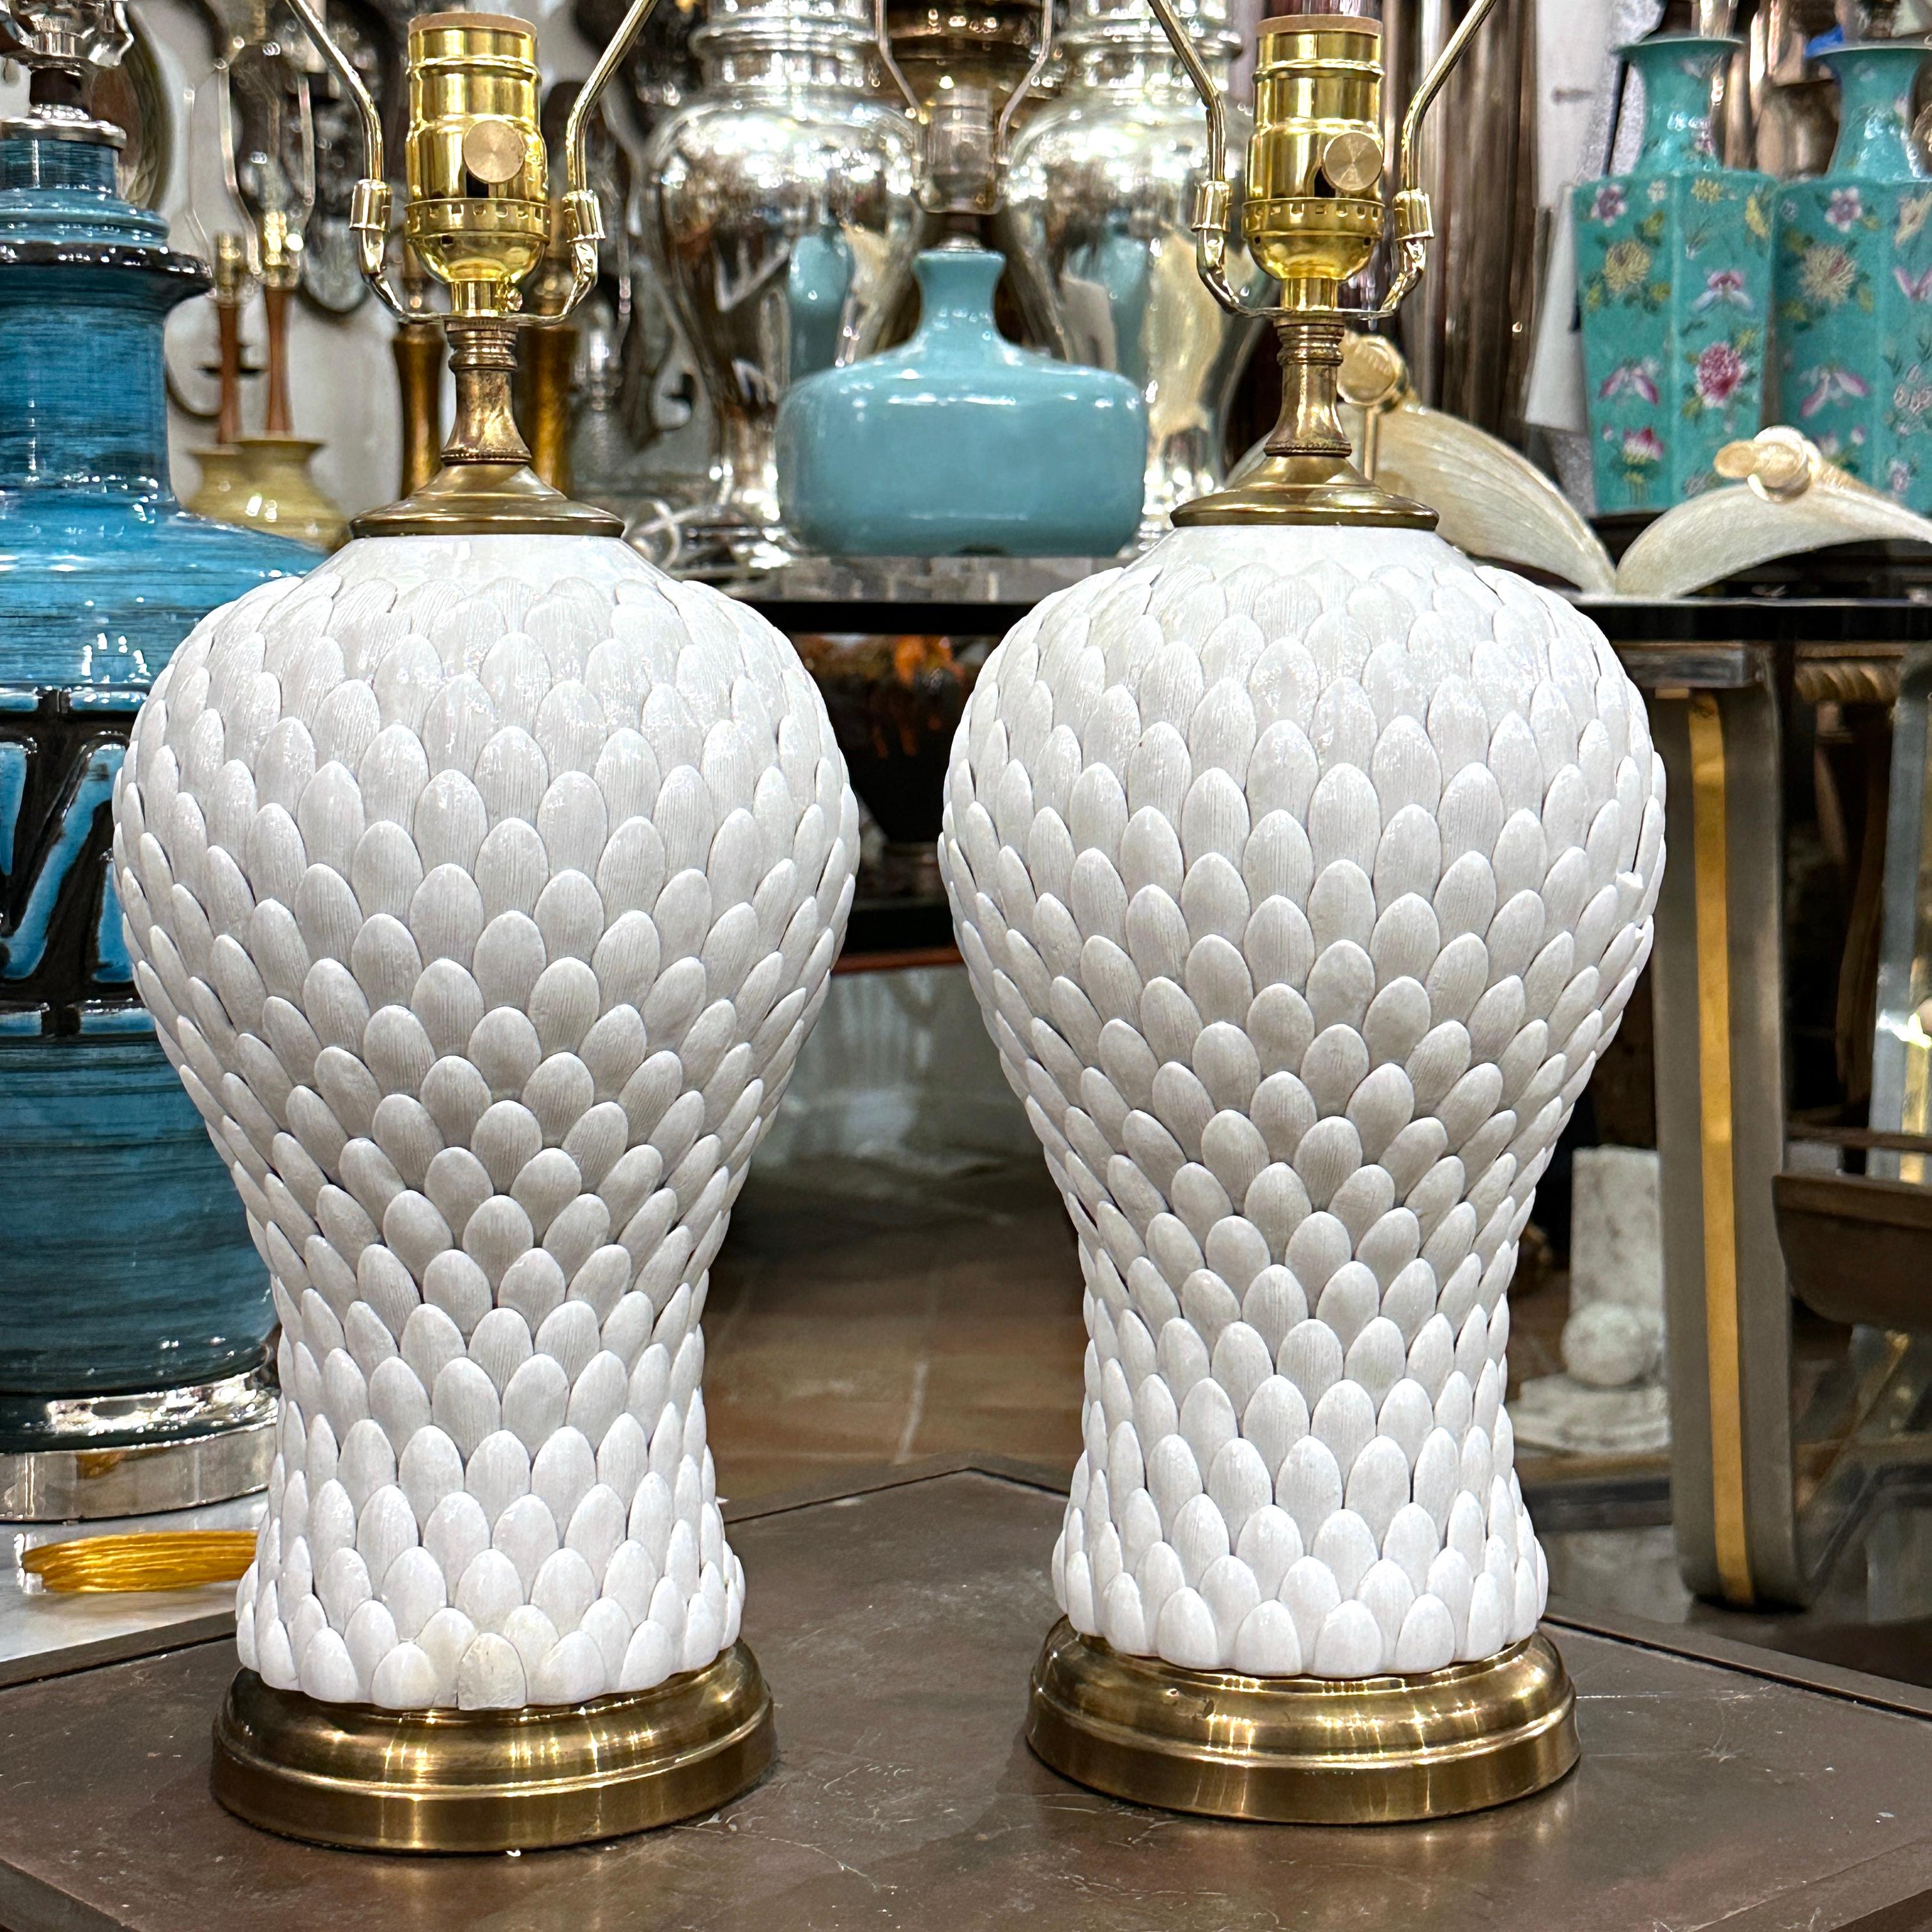 Pair of circa 1940's French porcelain table lamps.

Measurements:
Height of body: 14